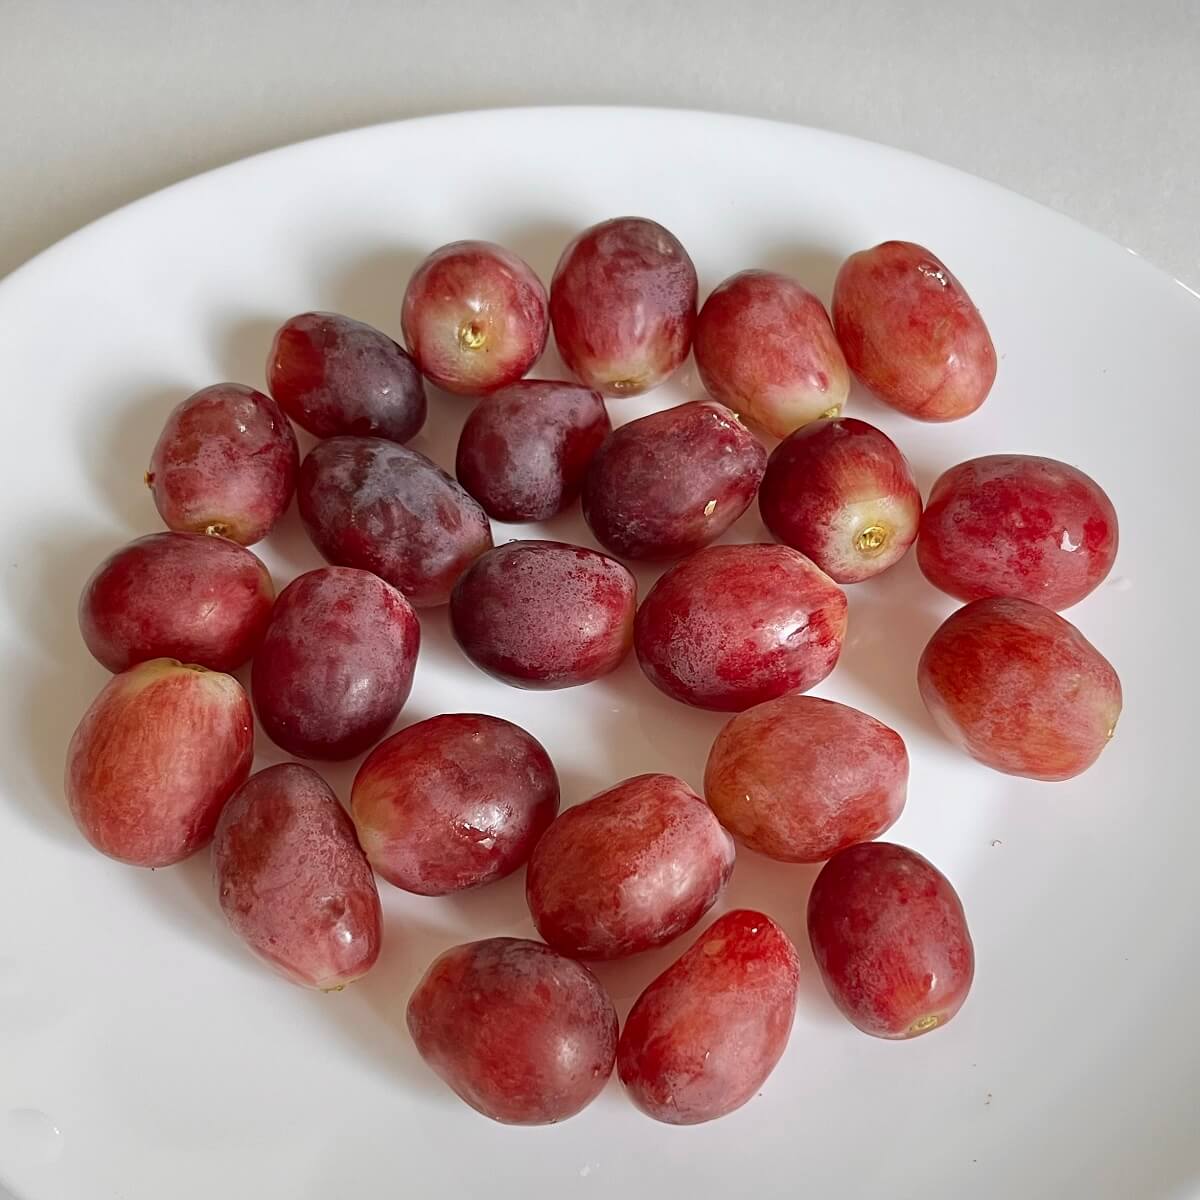 Twenty-four red grapes on a white plate.